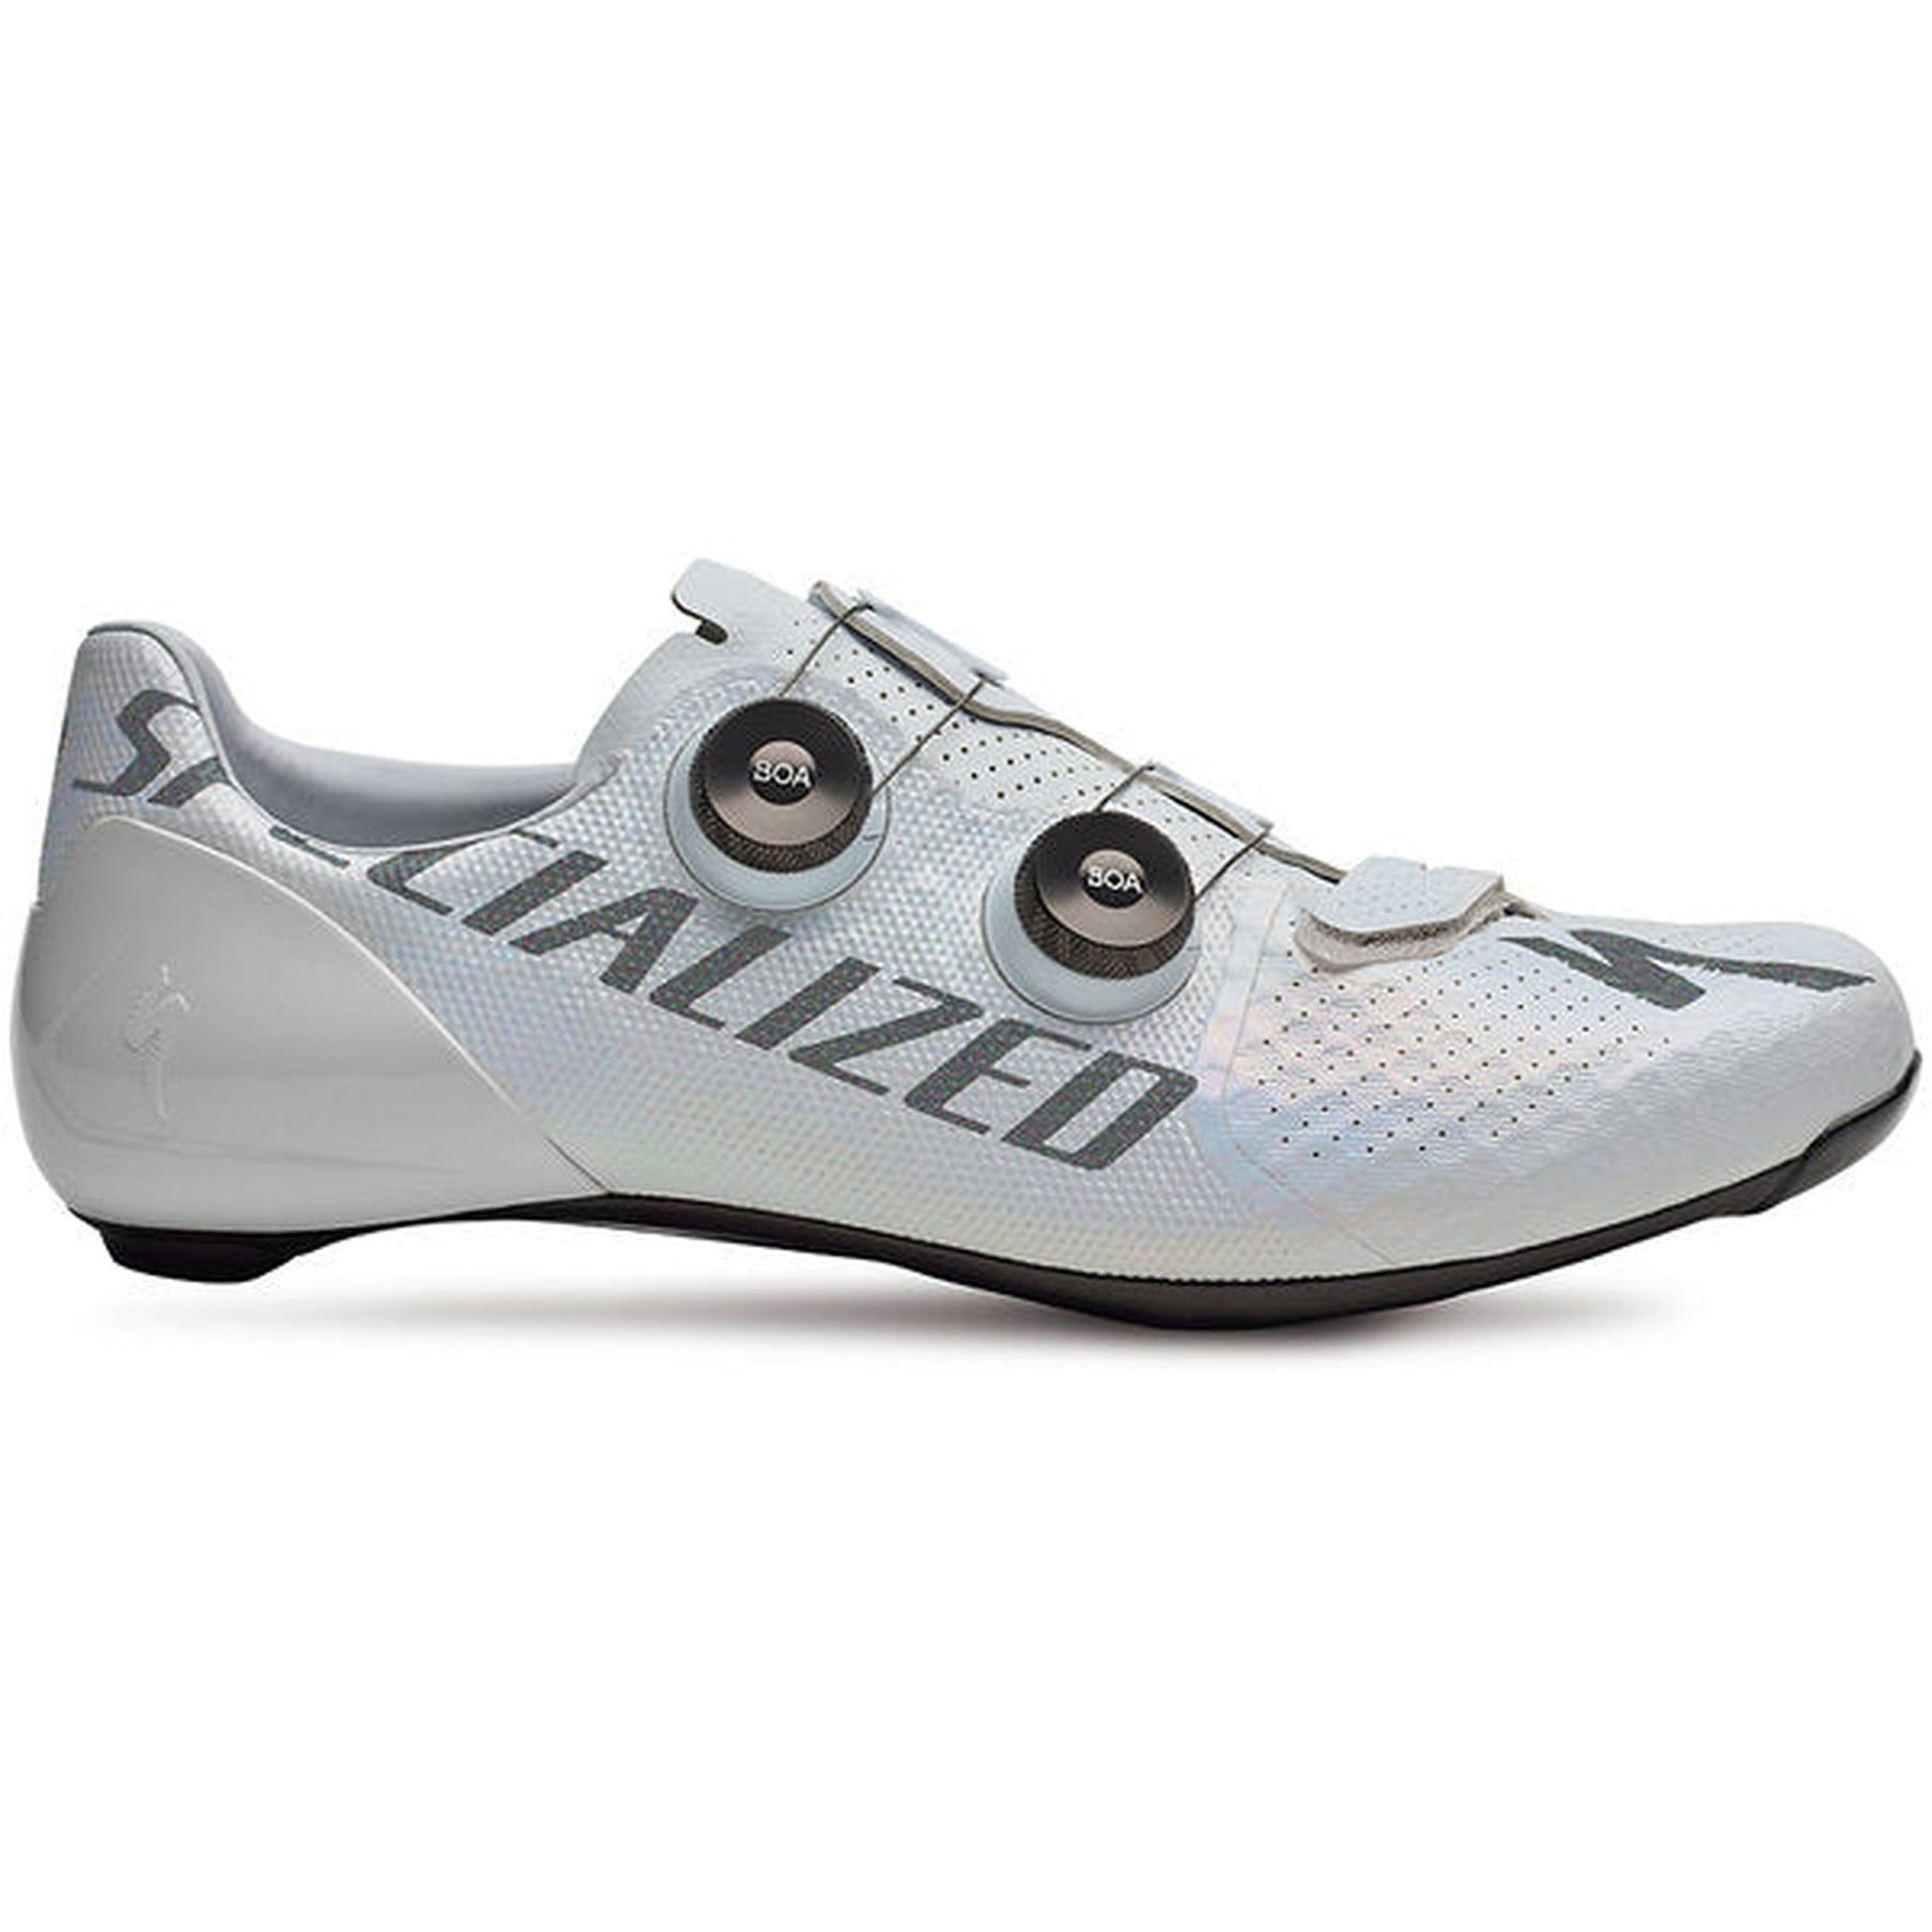 S-Works 7 Road Shoes | Bells Cycling Specialized